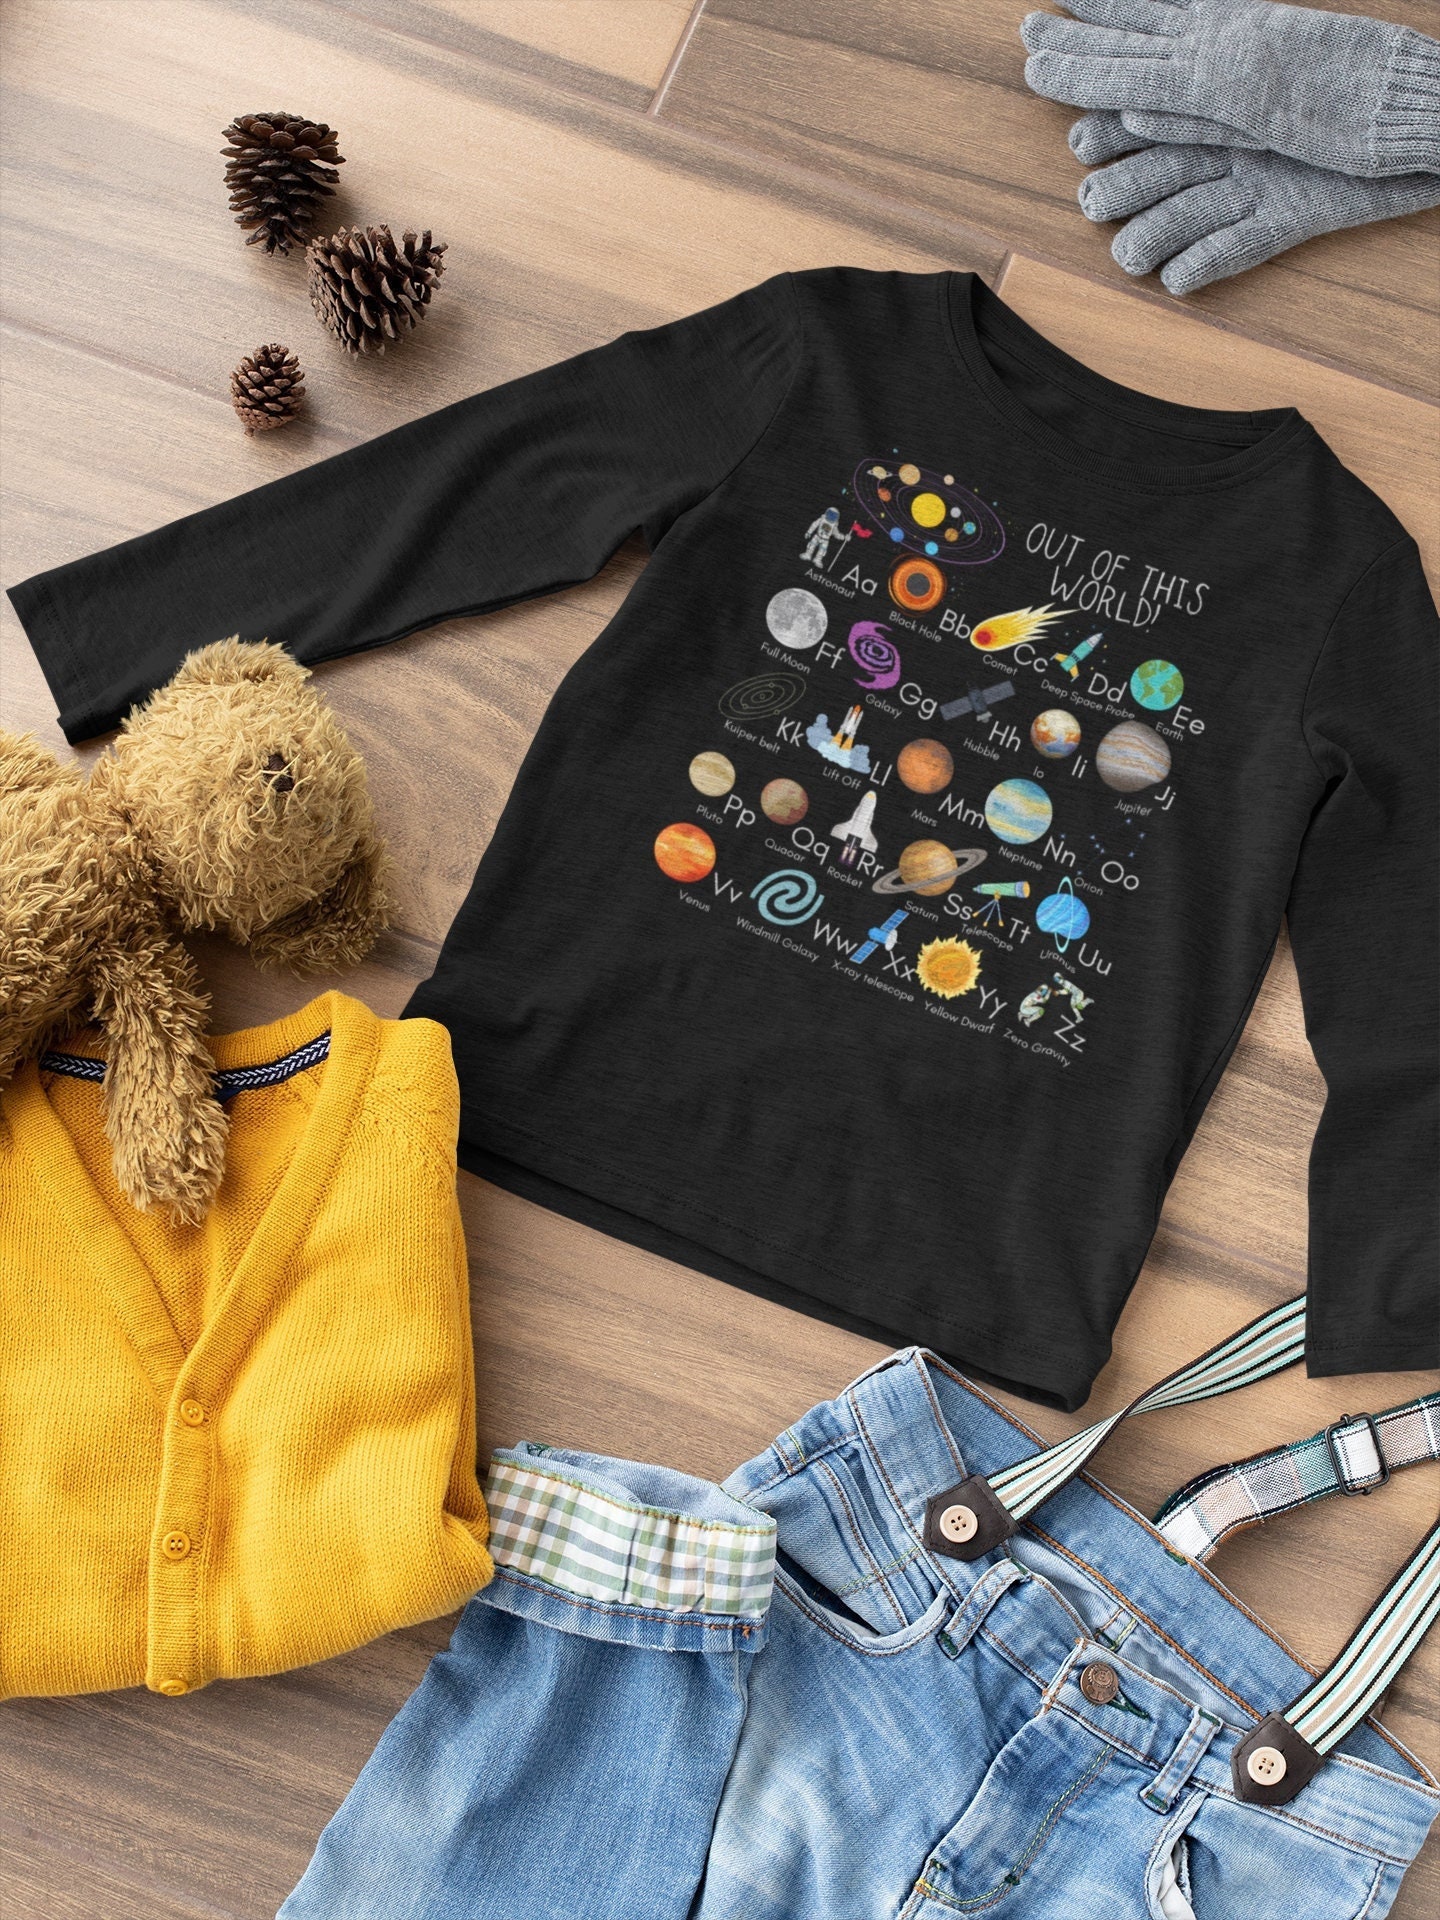 Starcove Galaxy Long Sleeve Men Button Up Shirt, Space Themed Stars Universe Cosmos Print Unique Buttoned Collar Dress Shirt with Chest Pocket L